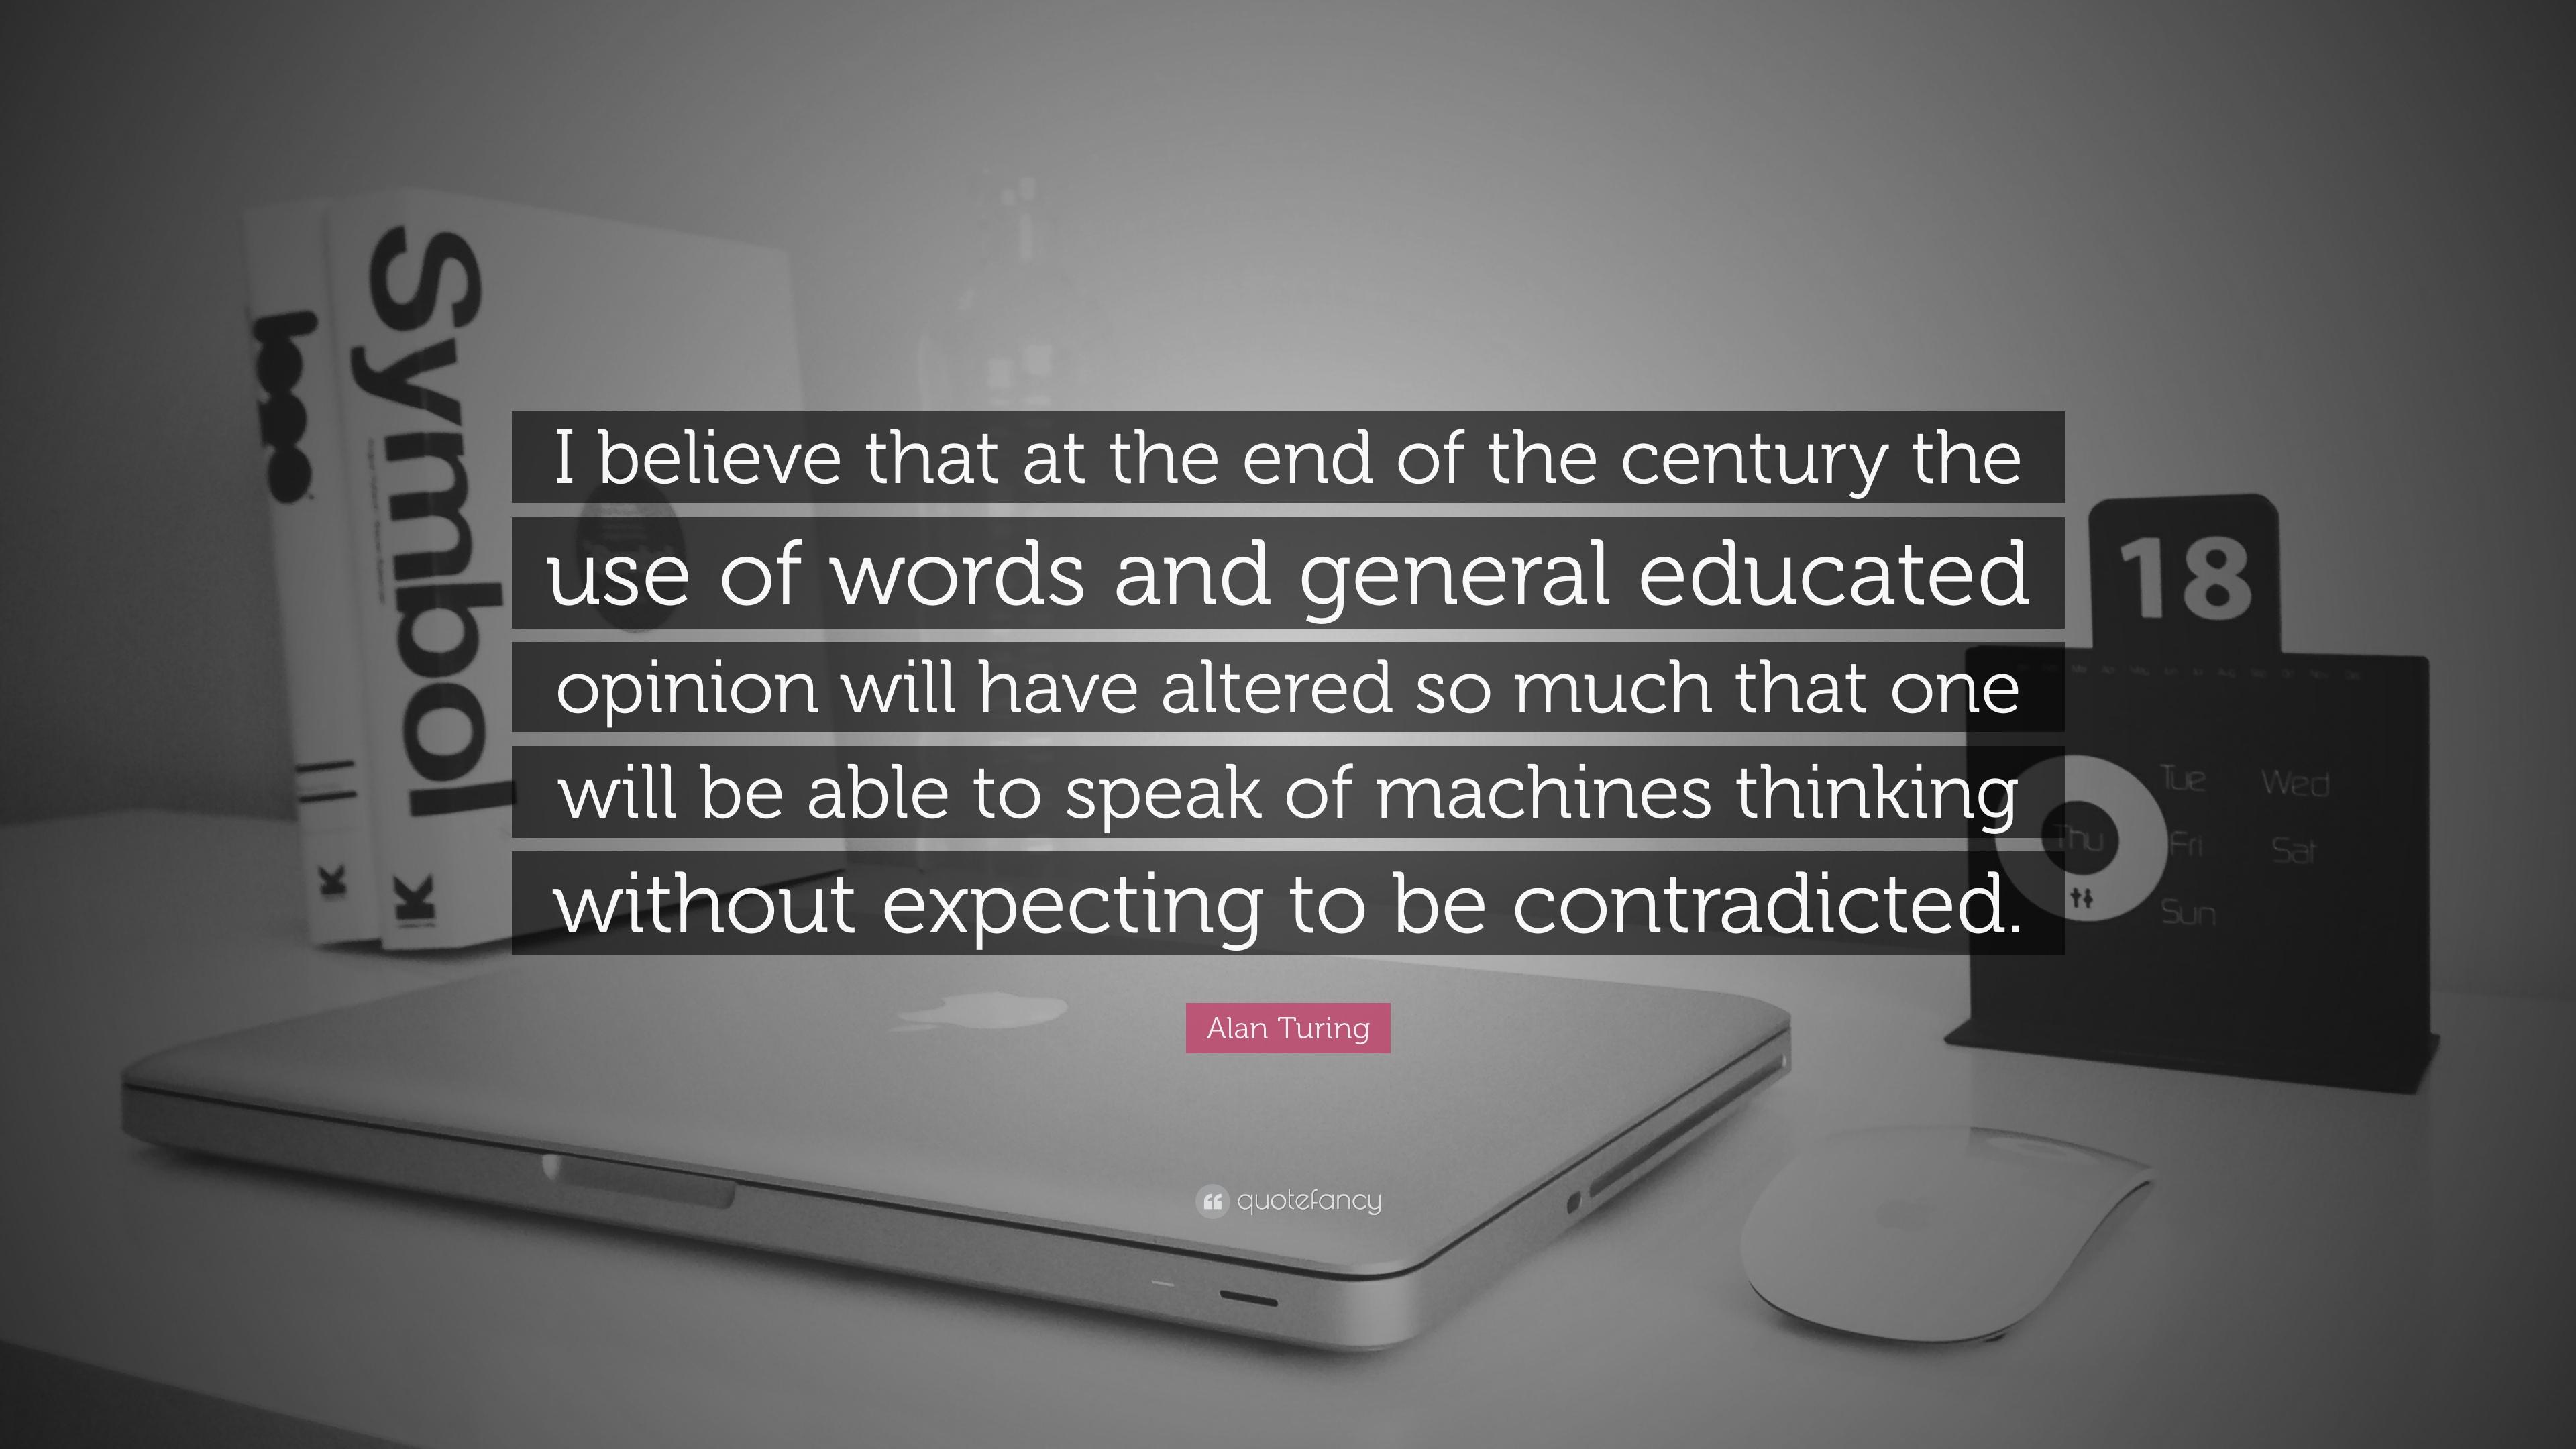 Alan Turing Quote: “I believe that at the end of the century the use